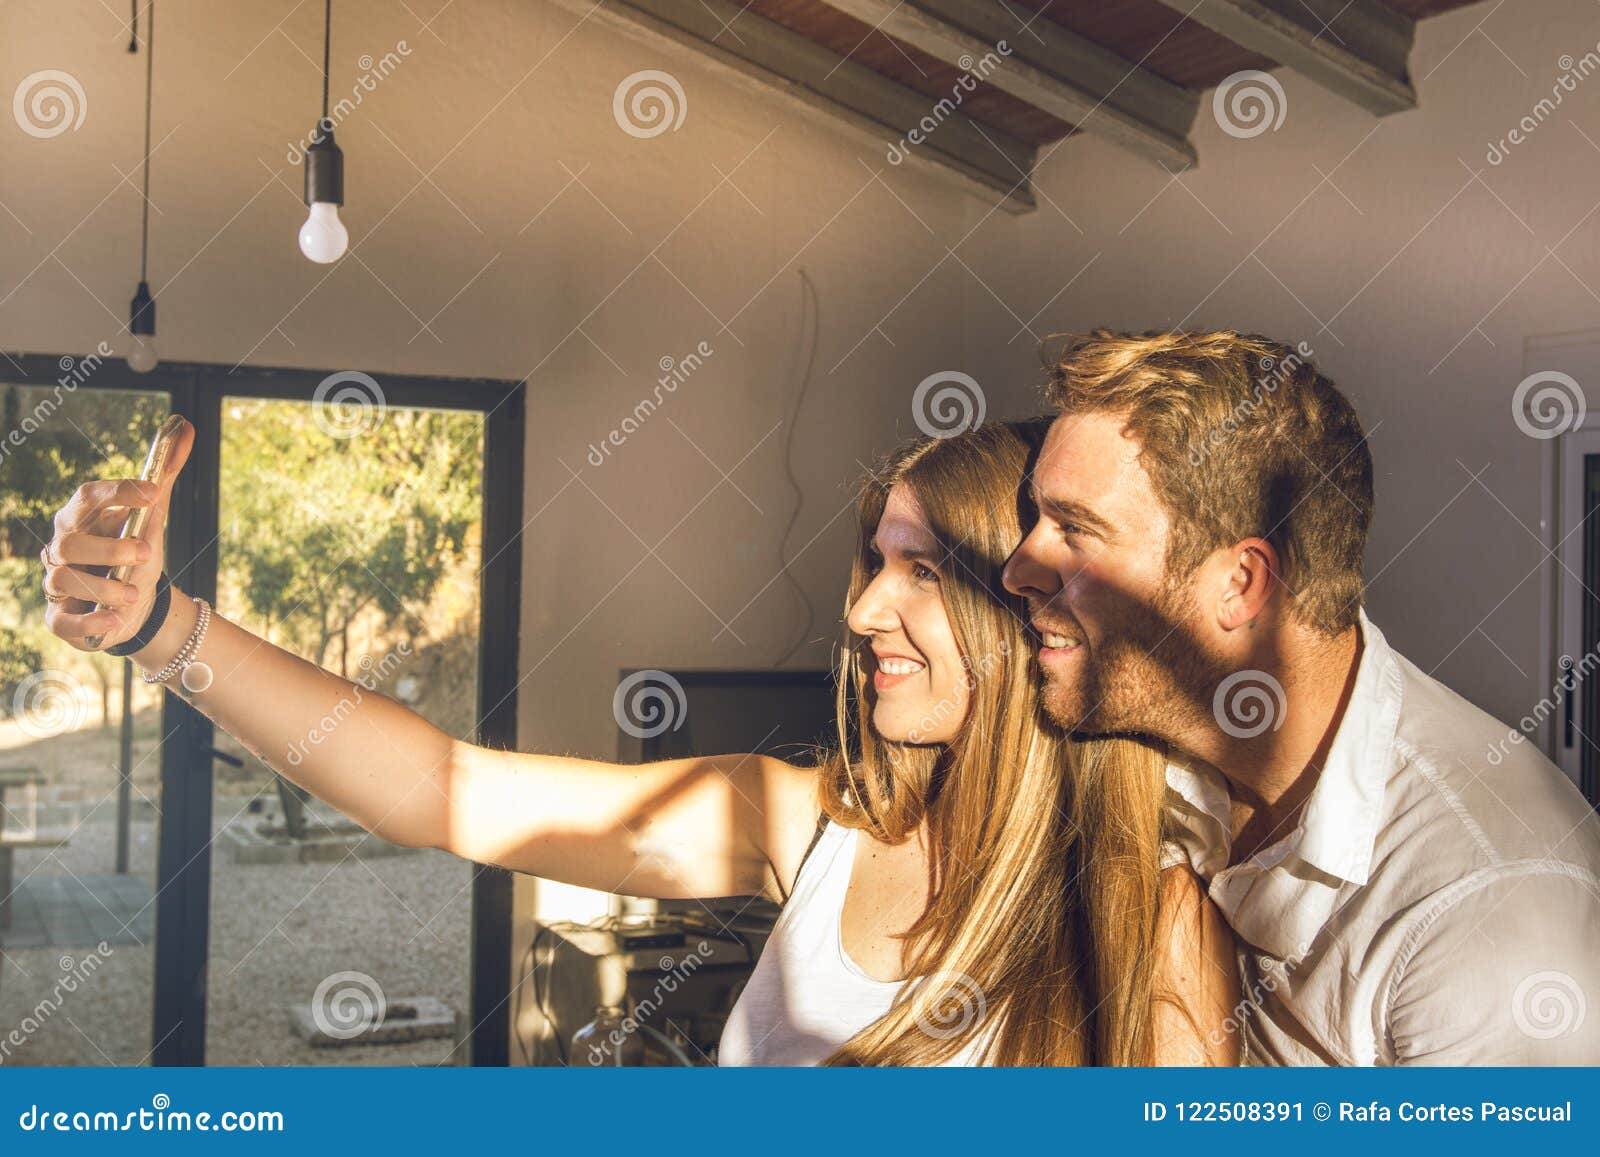 Couple Of Guy And Girl Making A Selfie At Home G